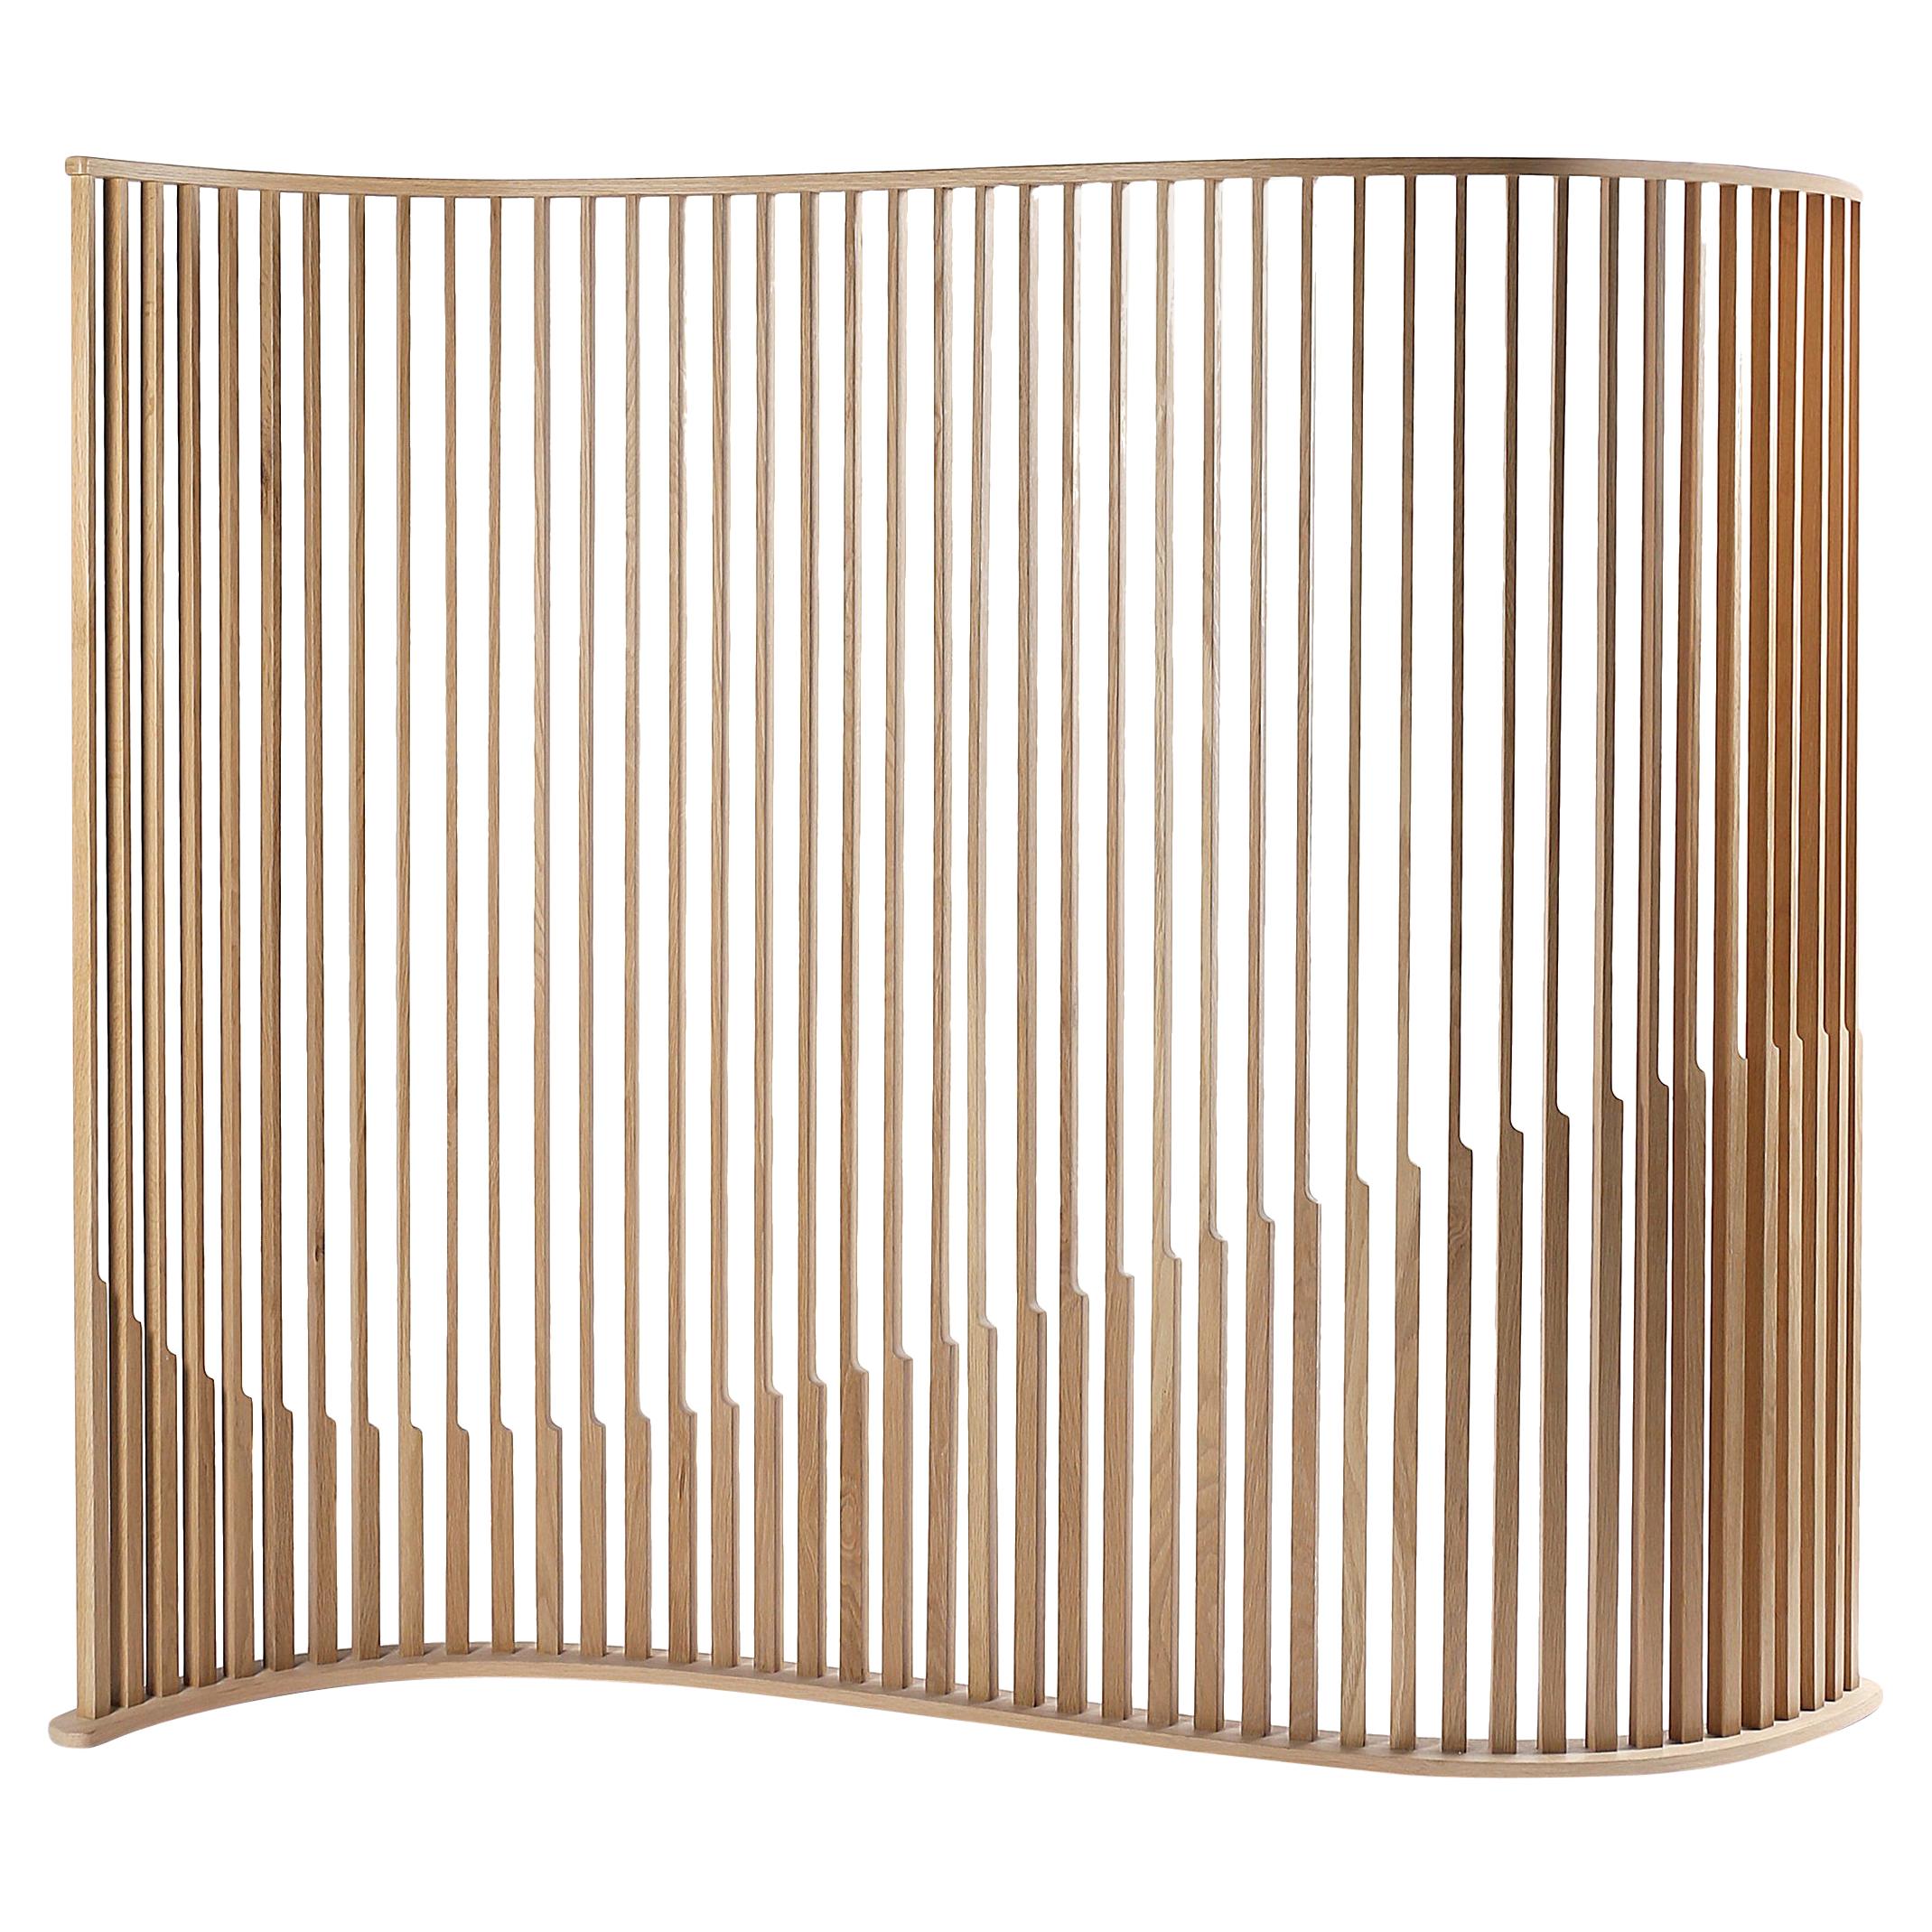 Laws of Motion Room Divider in Oak Wood, Space Divider Screen by Joel Escalona